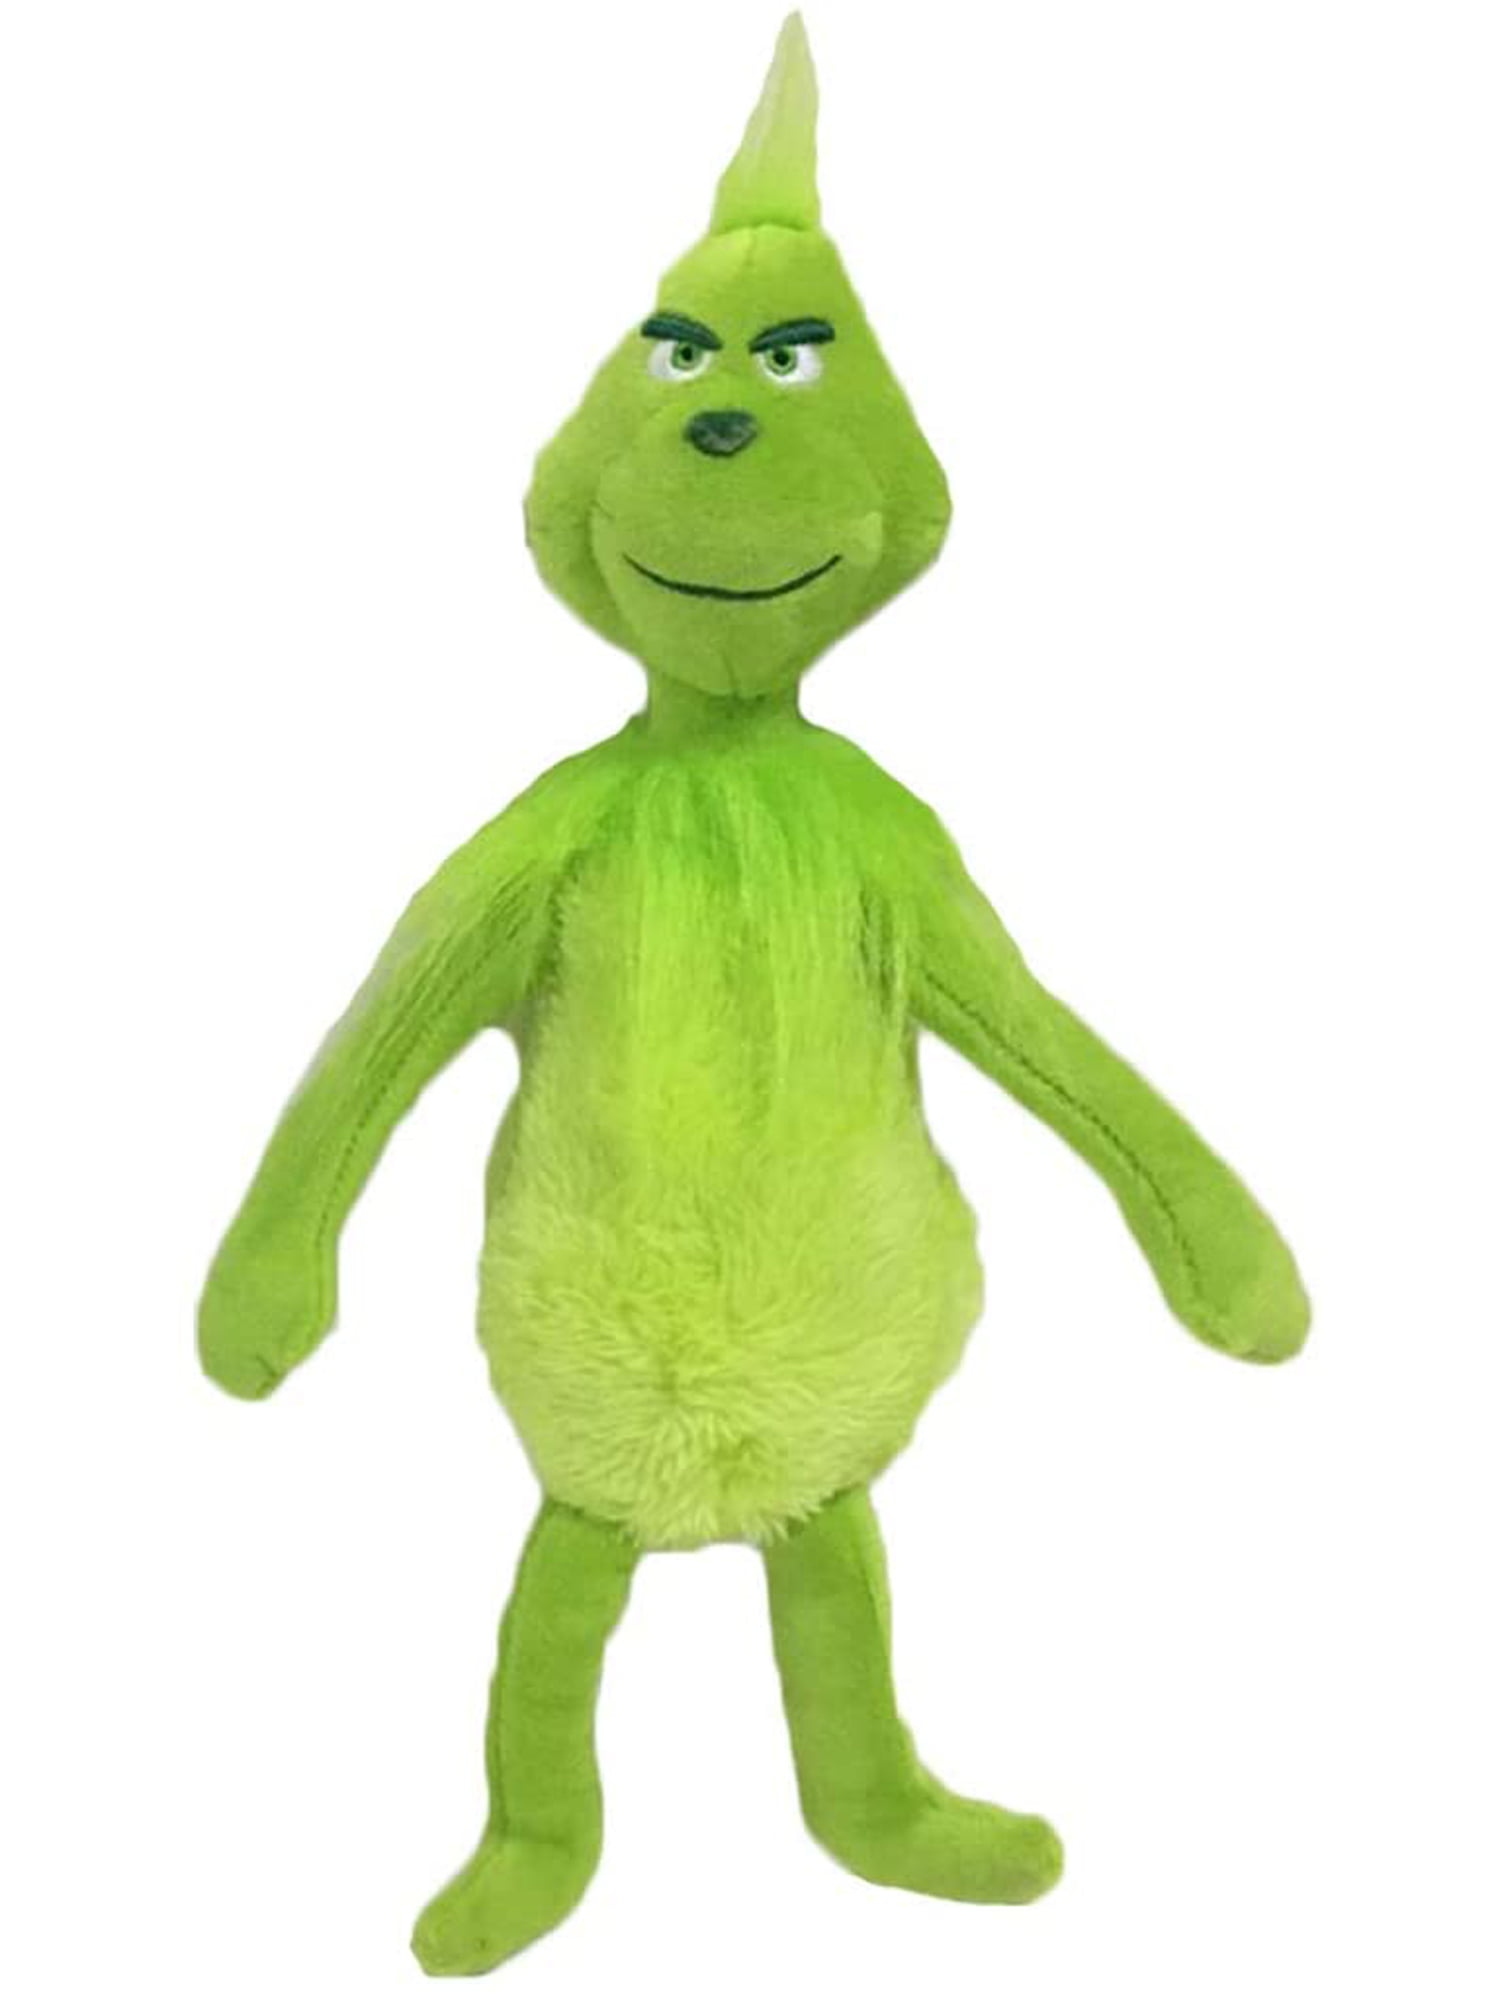 12" Grinch Plush How the Grinch Stole Christmas Kids Xmas Gift Stuffed Doll Toy